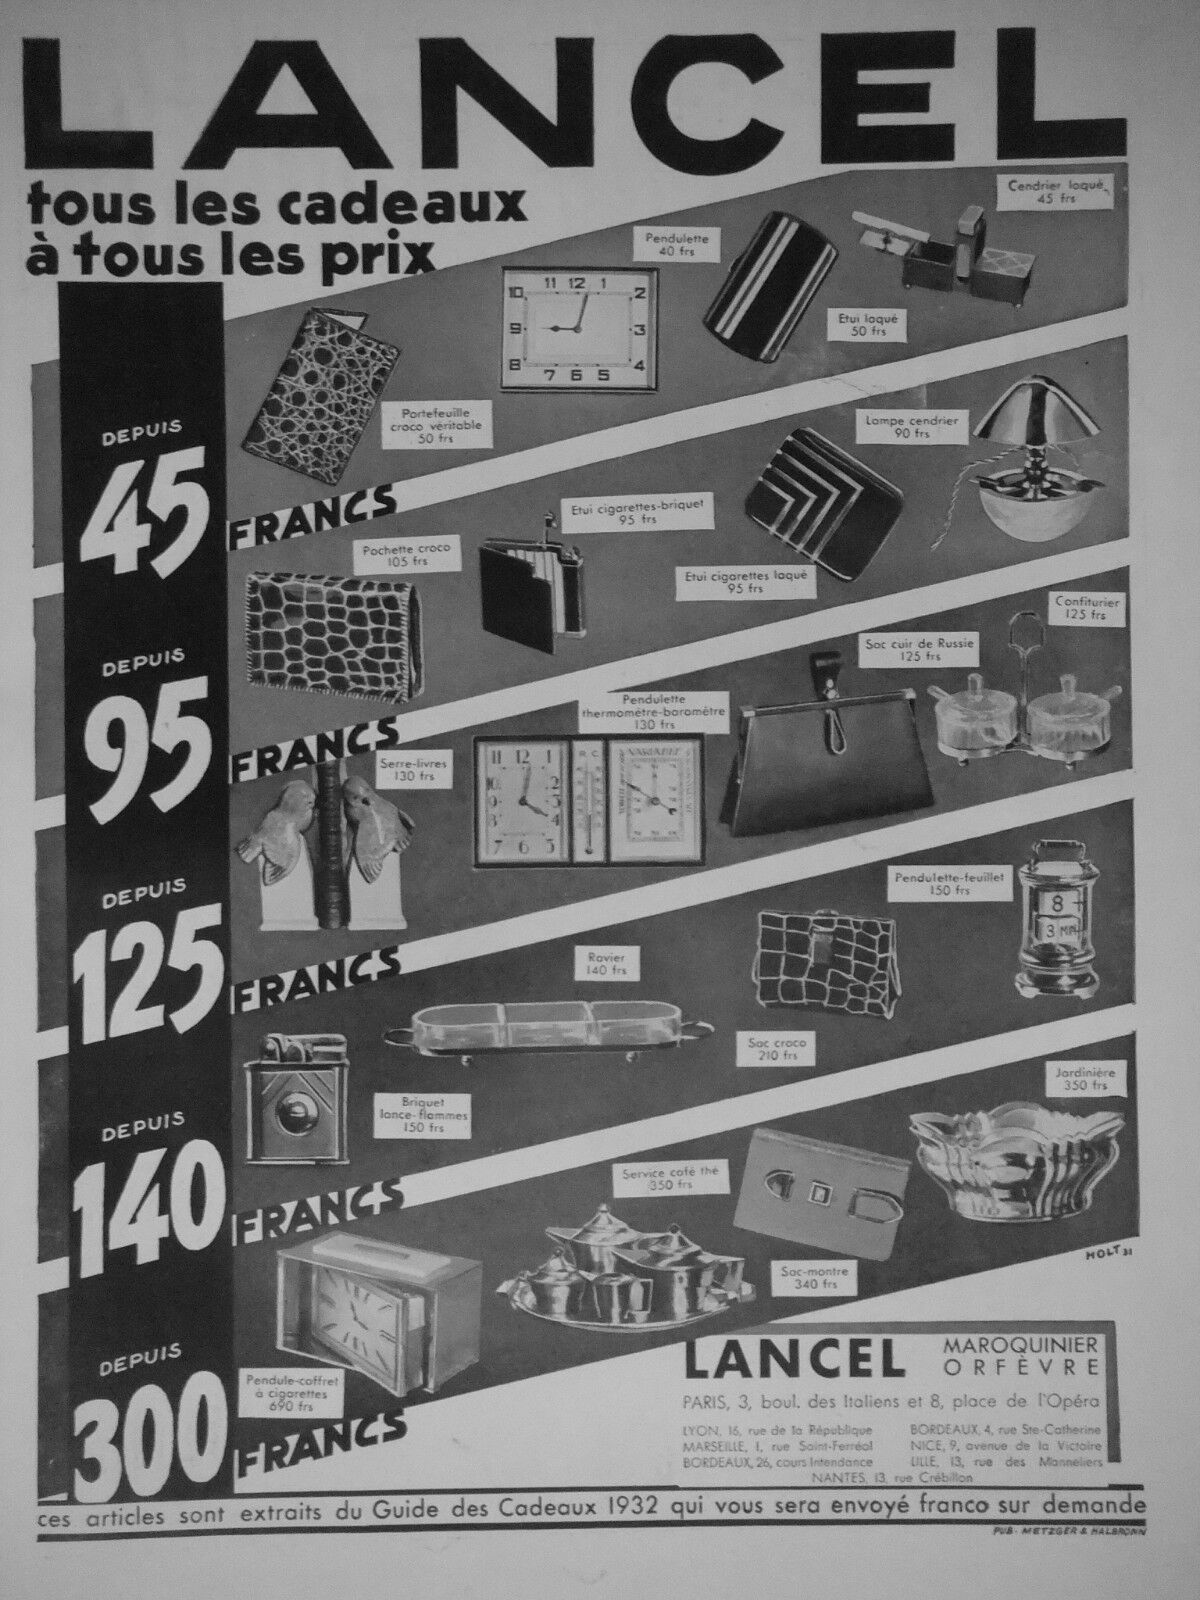 1931 LANCEL PRESS ADVERTISEMENT AT ALL PRICES LEATHER GOLDSMITH - ADVERTISING